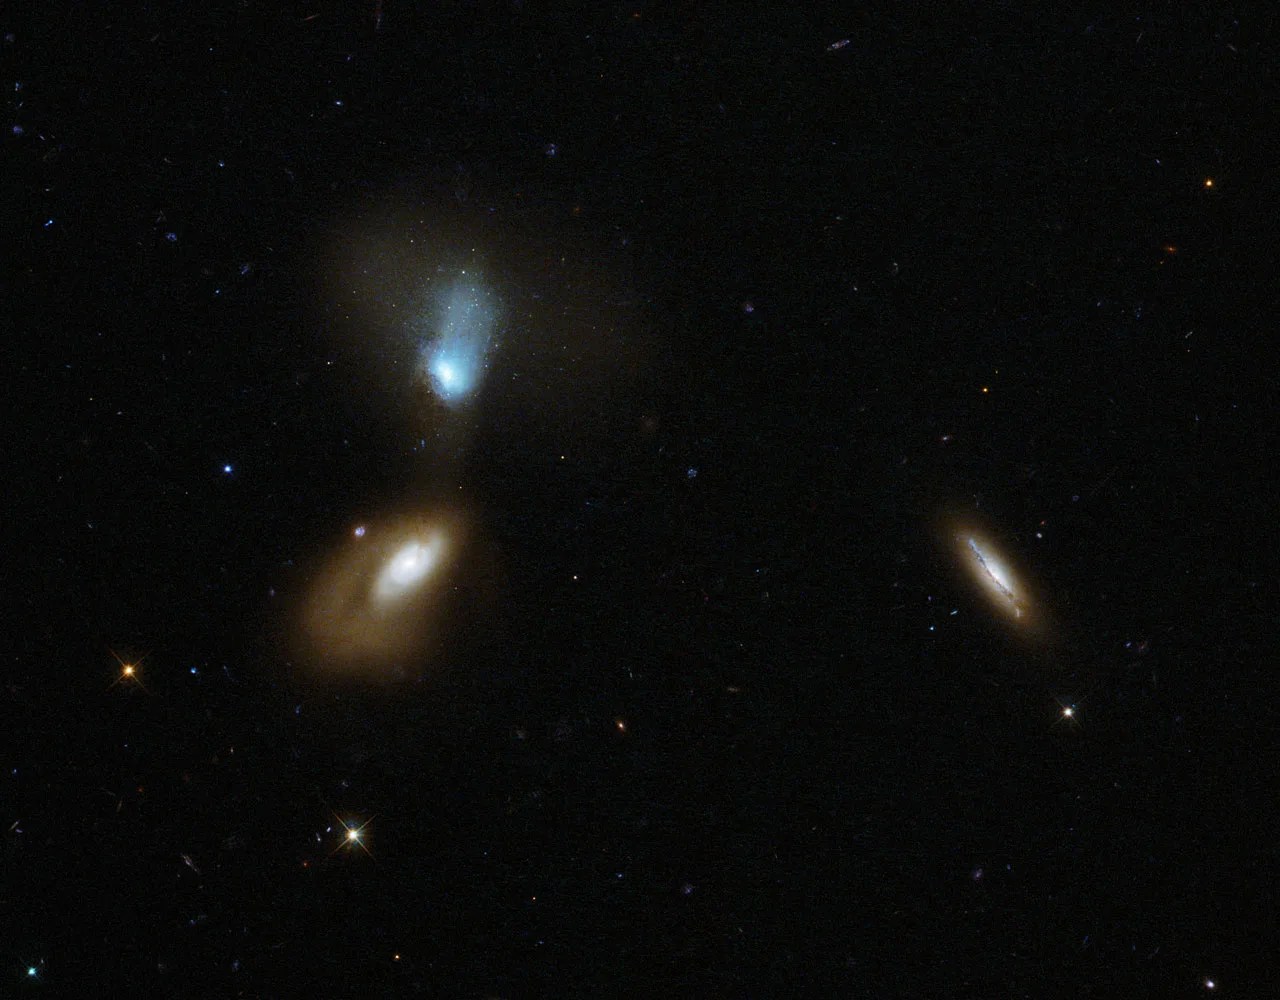 Three galaxies - two of which are on the left and are relatively close in the picture, visibly distorting each other. The third galaxy is on the right side of the image.